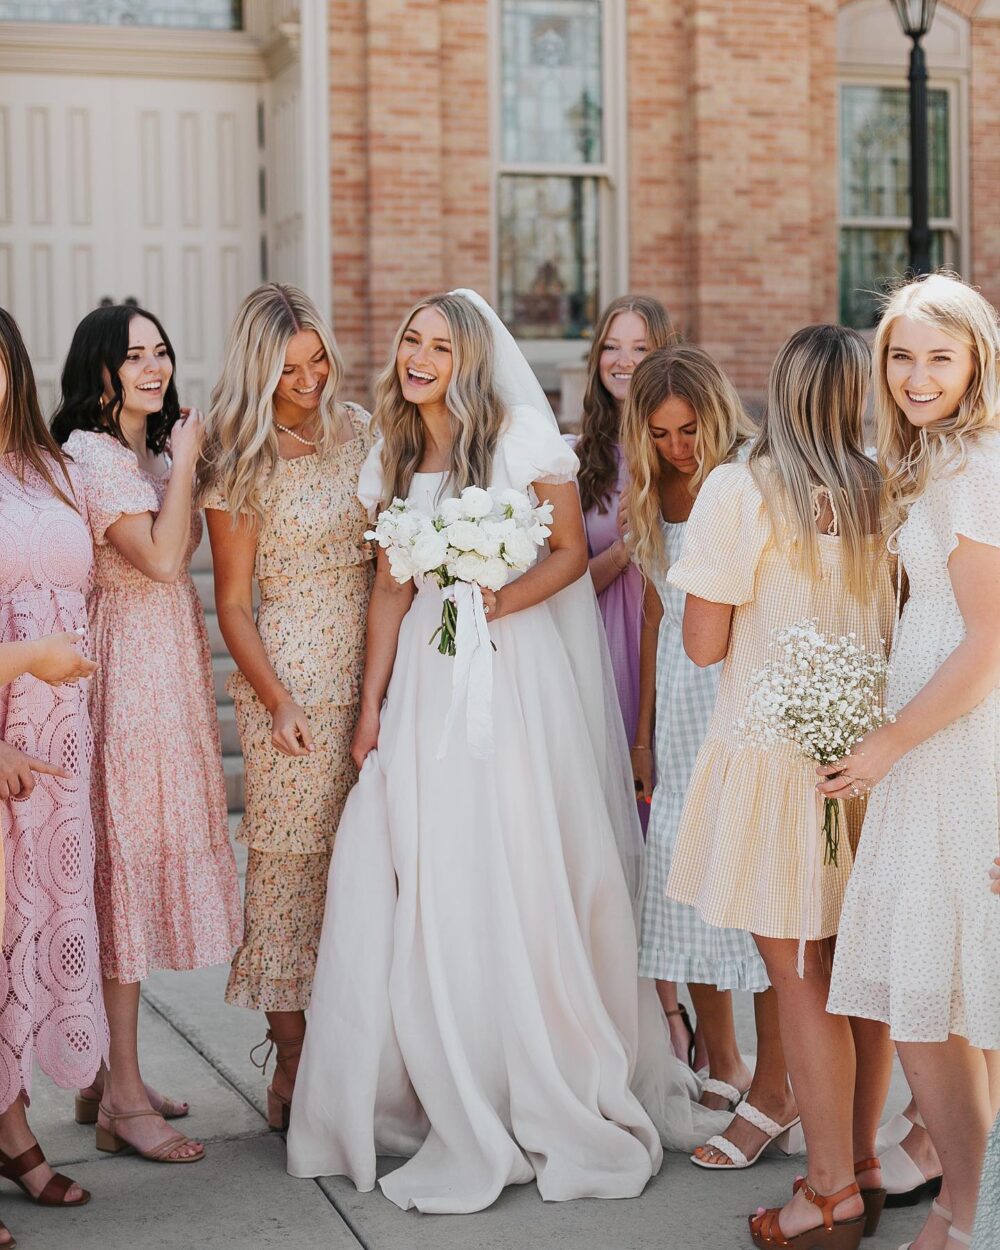 image of a group of women at a wedding wearing pretty dresses next to a beautiful bride